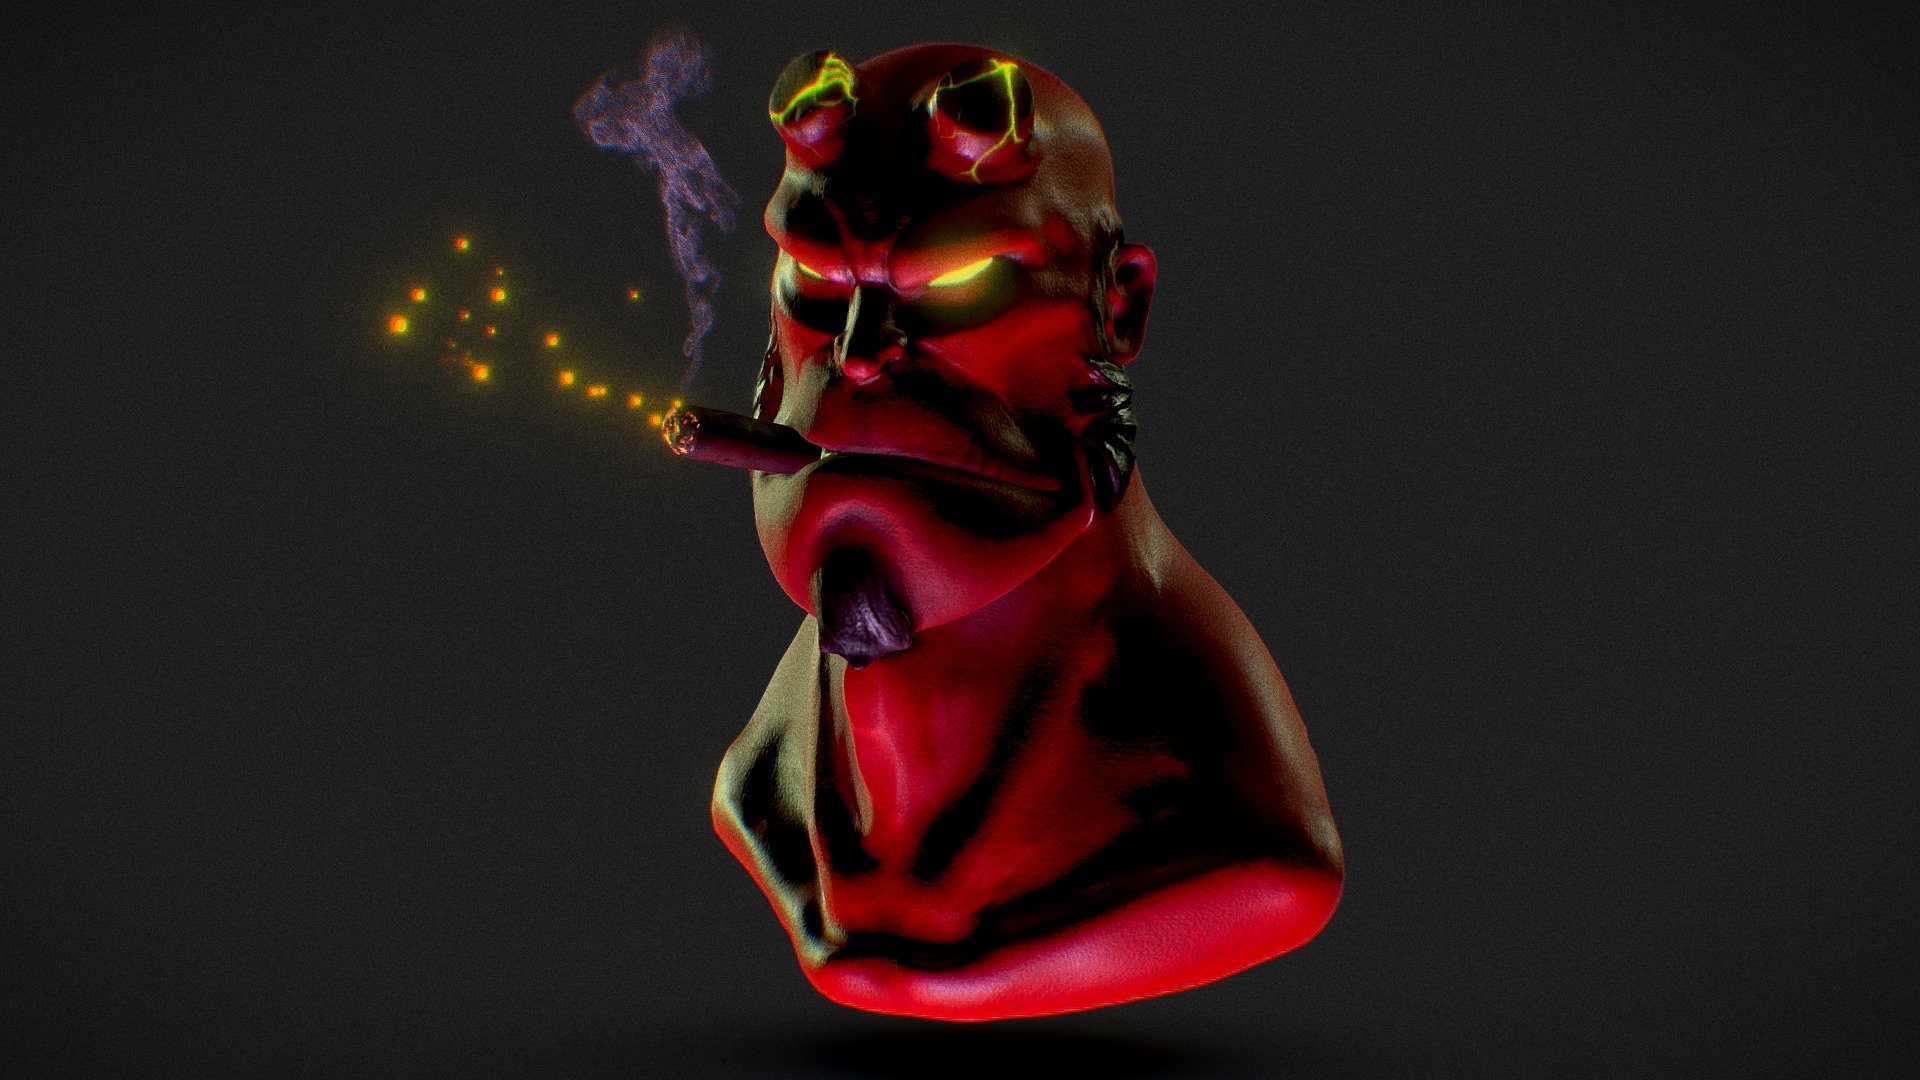 Trying this wokrflow with. Paint and export through. Zbrush to blender to sketchfab.
Music: Movie trailer &ldquo;Smoke on the water